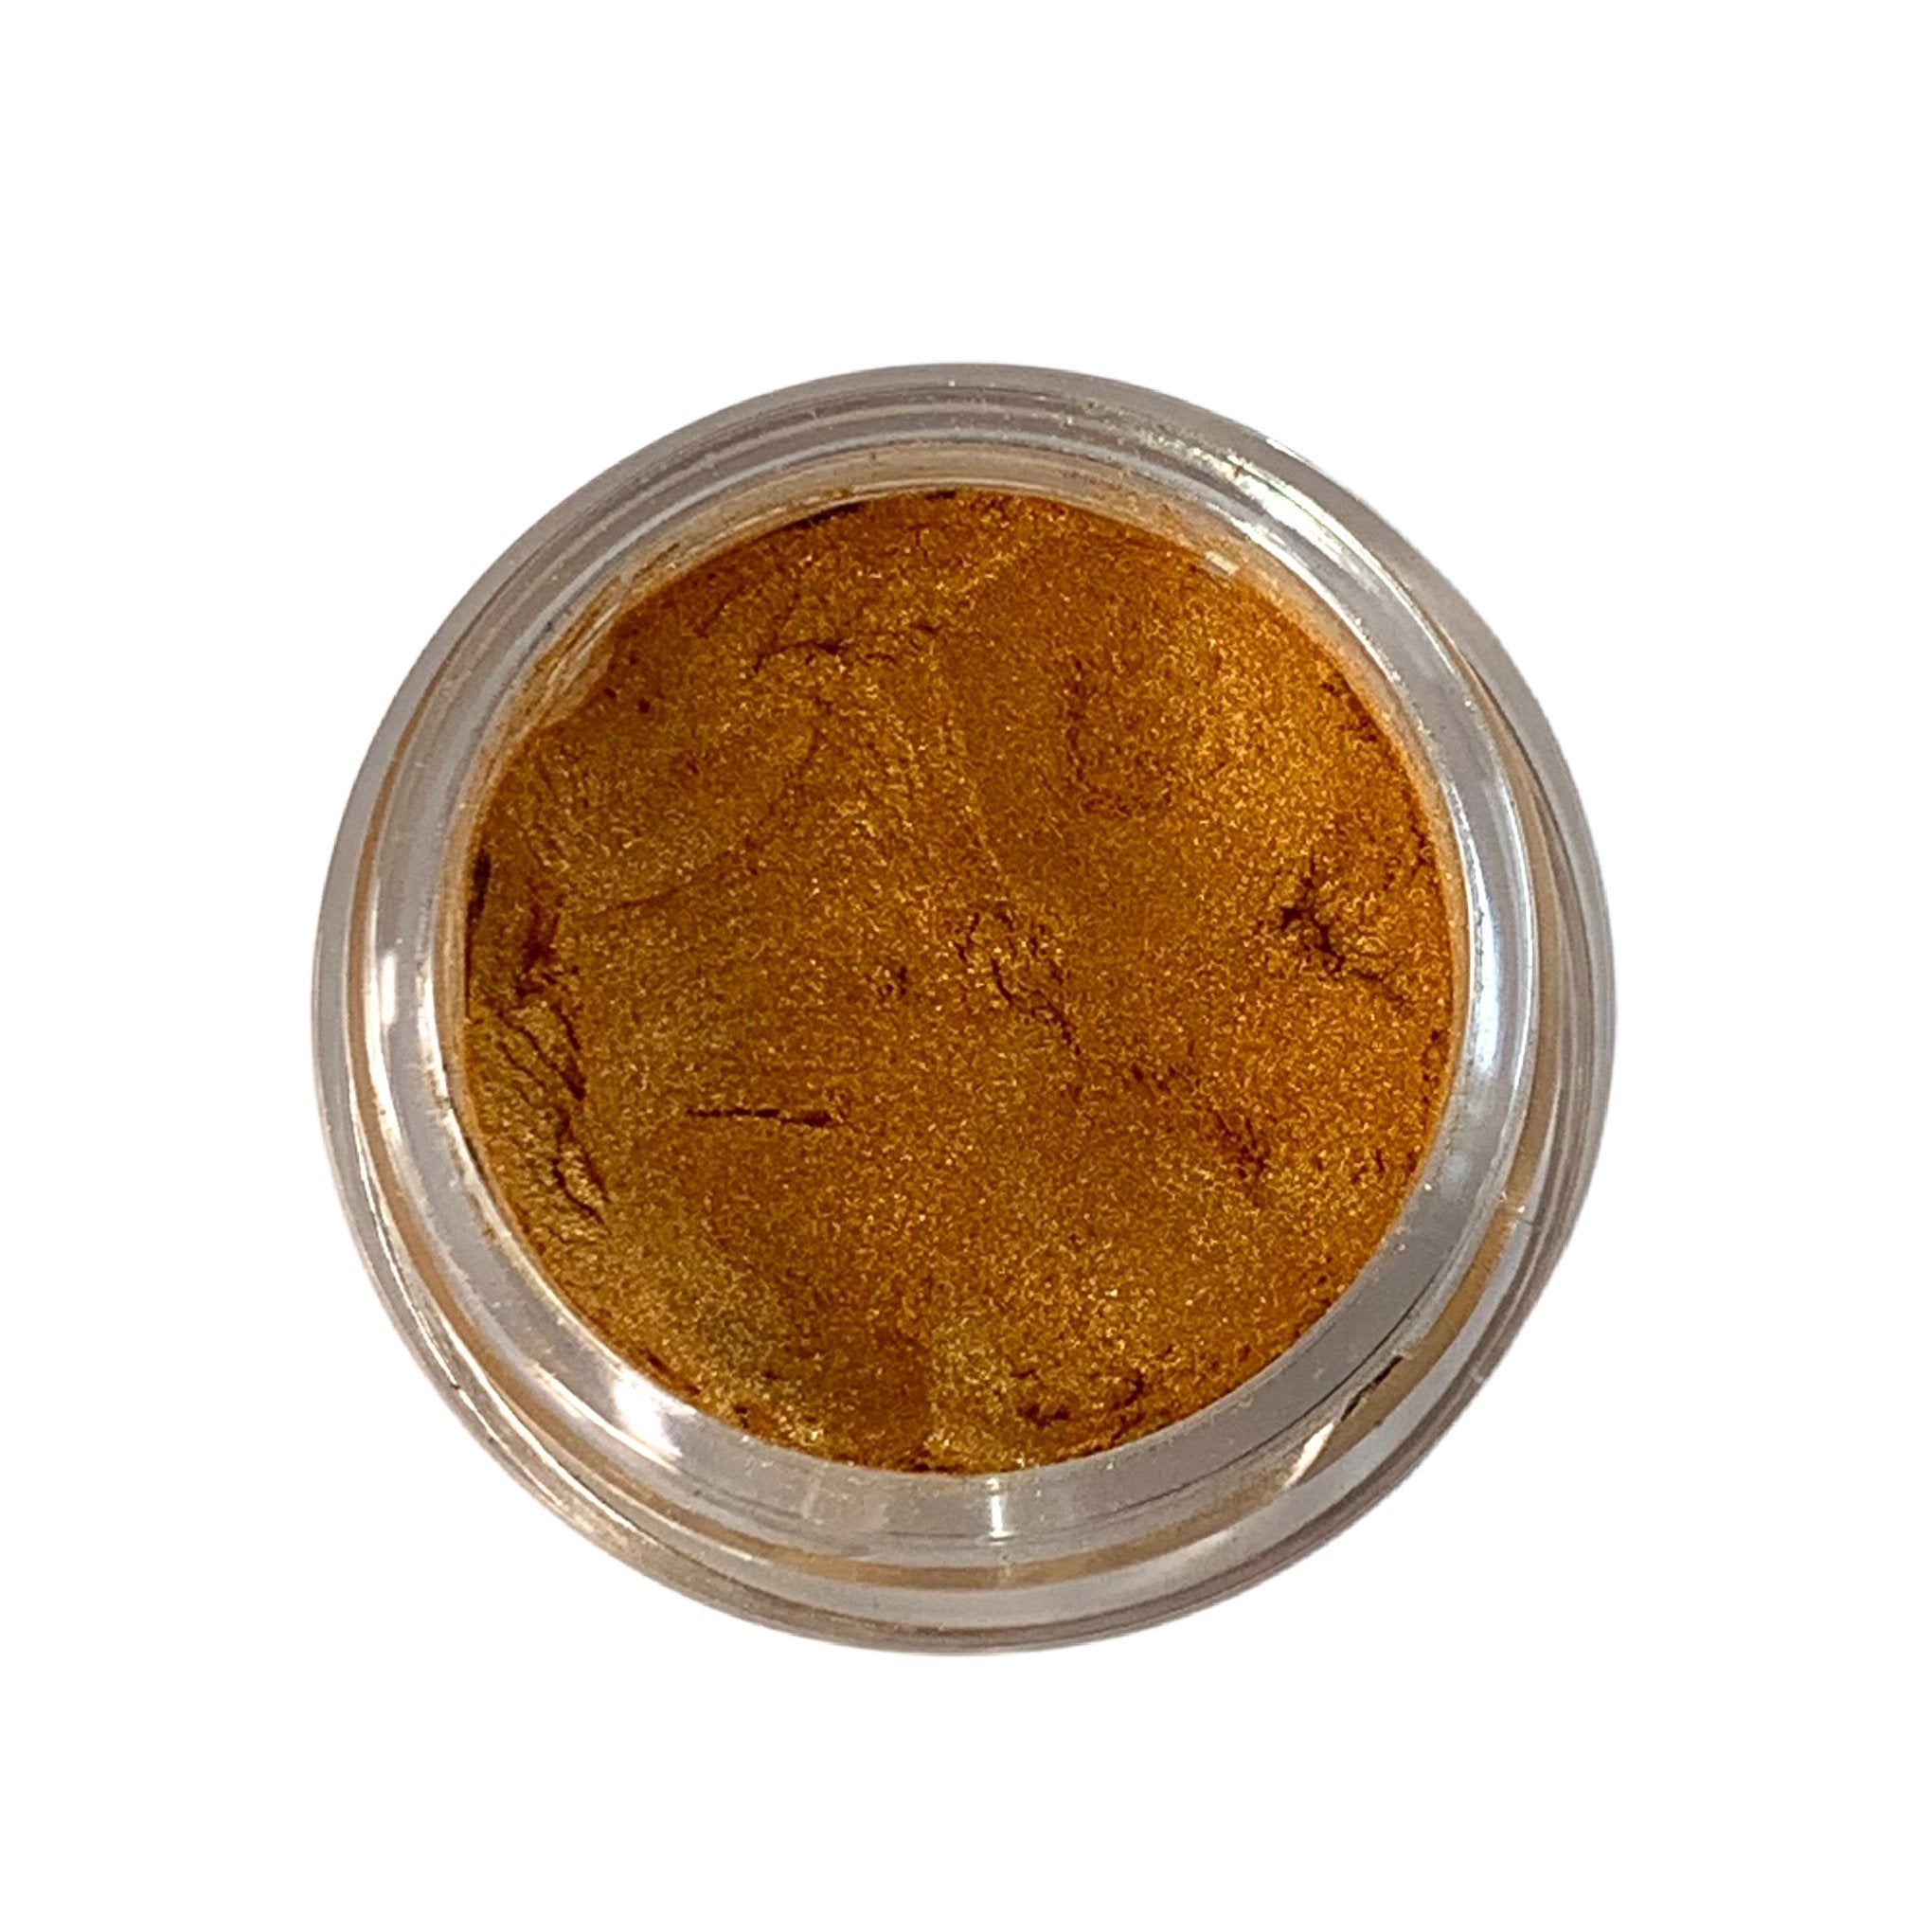 Amber colored loose eyeshadow in a 10 gram sifter jar. Vegan and cruelty free.